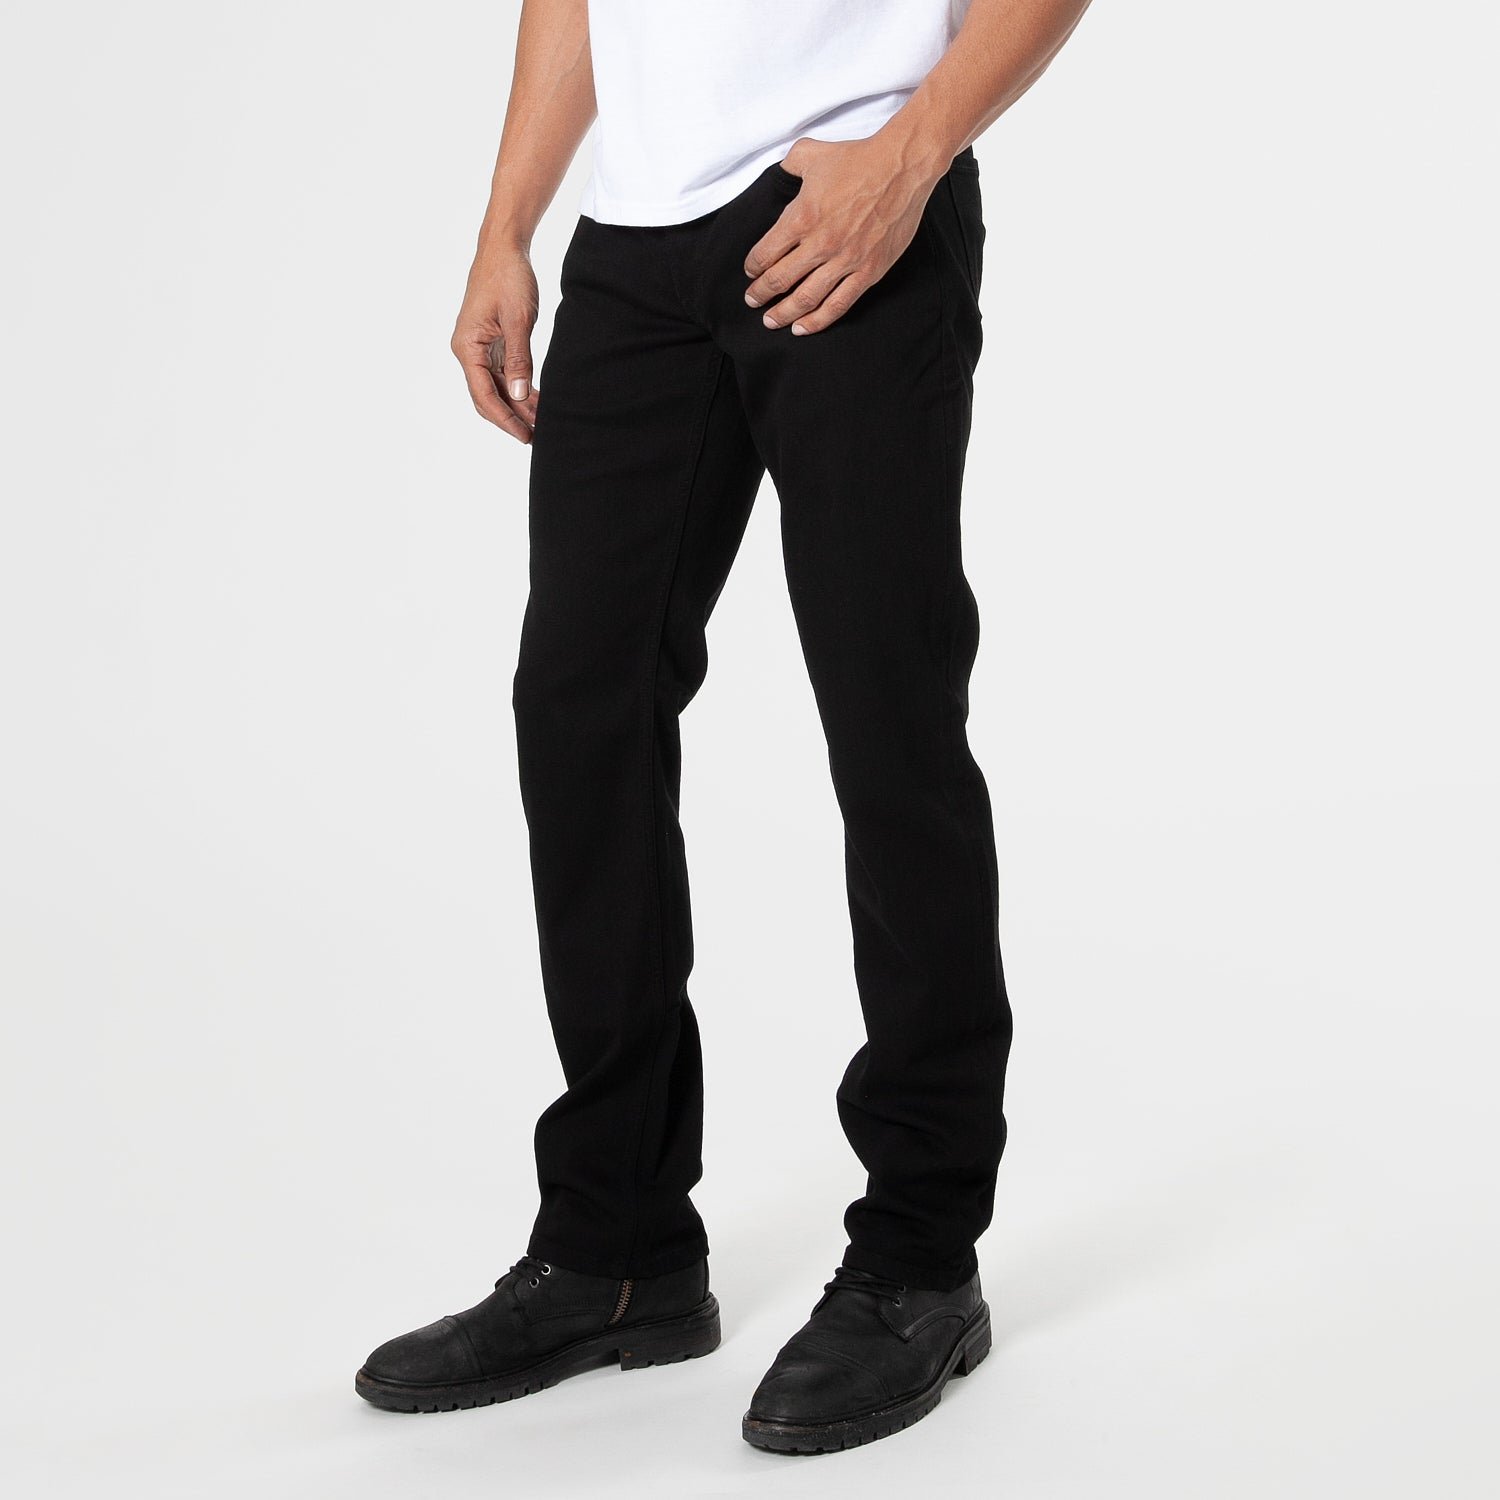 Indigo and Black Straight Fit Comfort Jeans 2-Pack